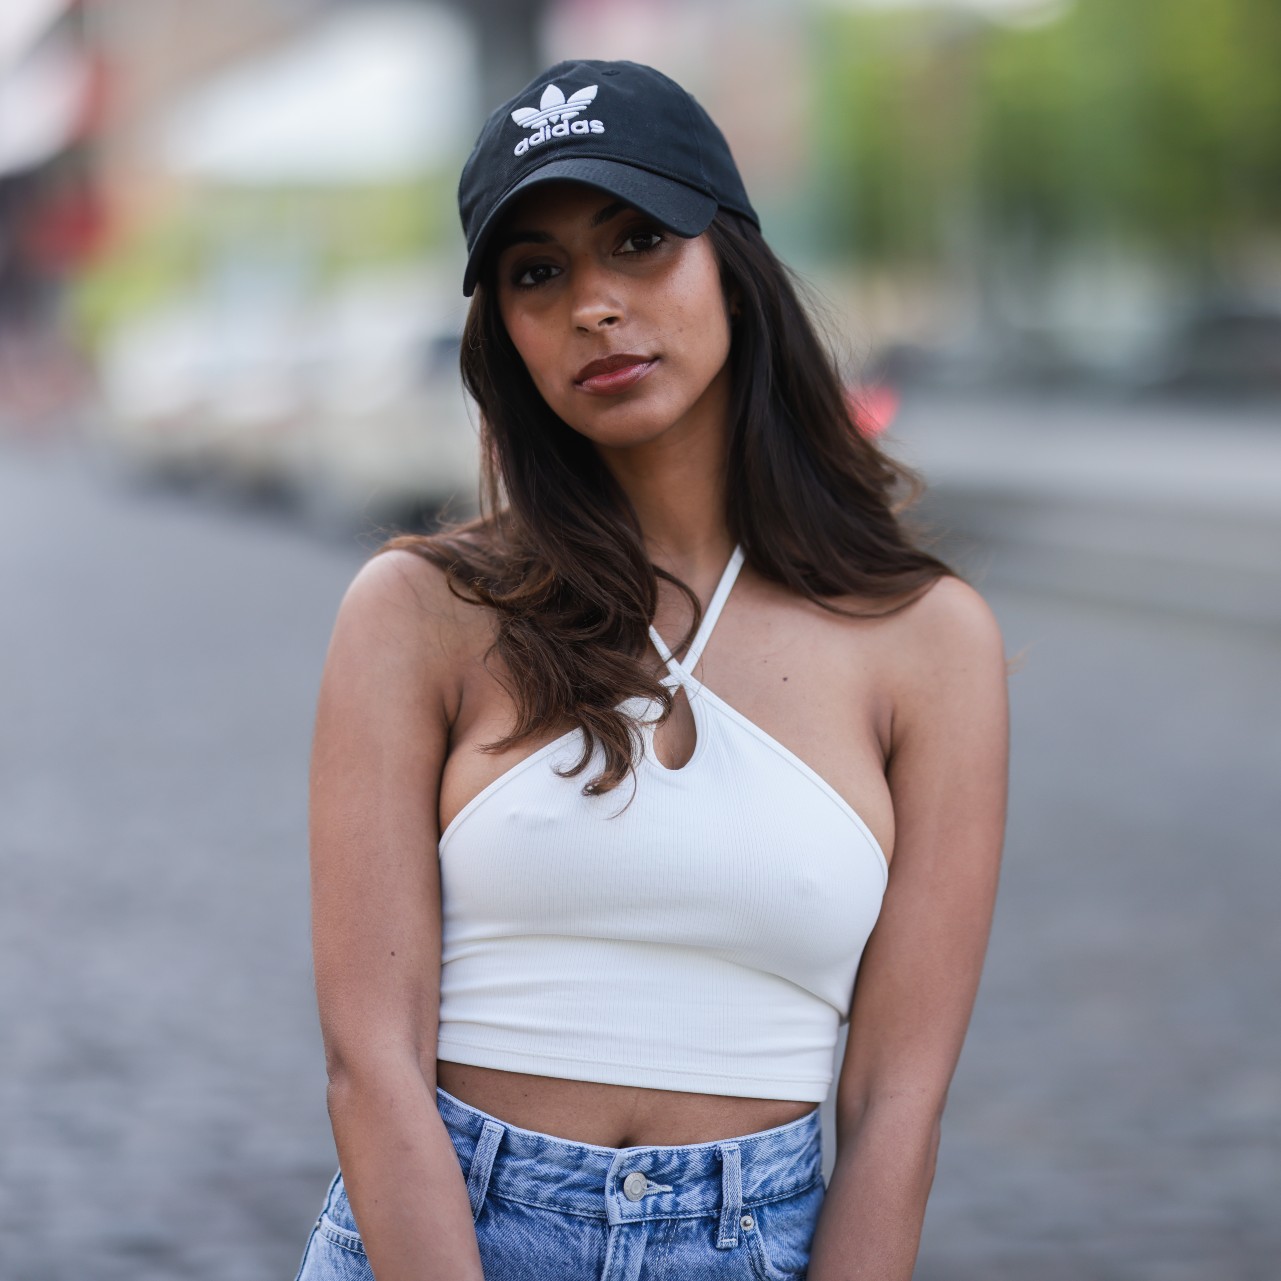 Women's Bucket Hat Outfits for 2022 [From the '90s] - GIGI PIP